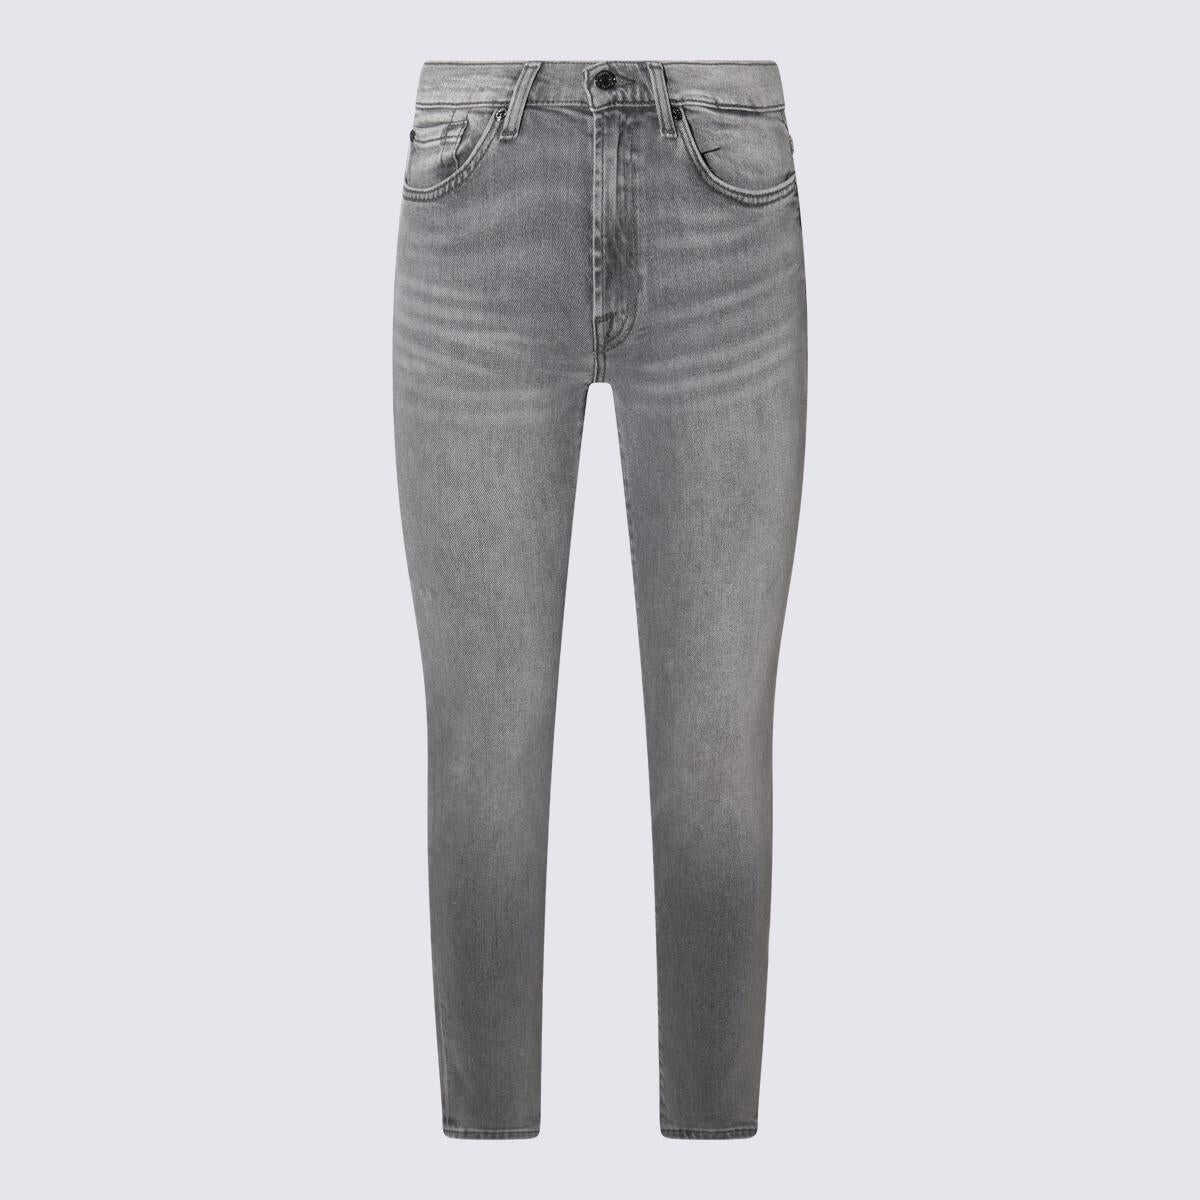 7 For All Mankind 7 FOR ALL MANKIND DARK GREY COTTON ROXANNE JEANS